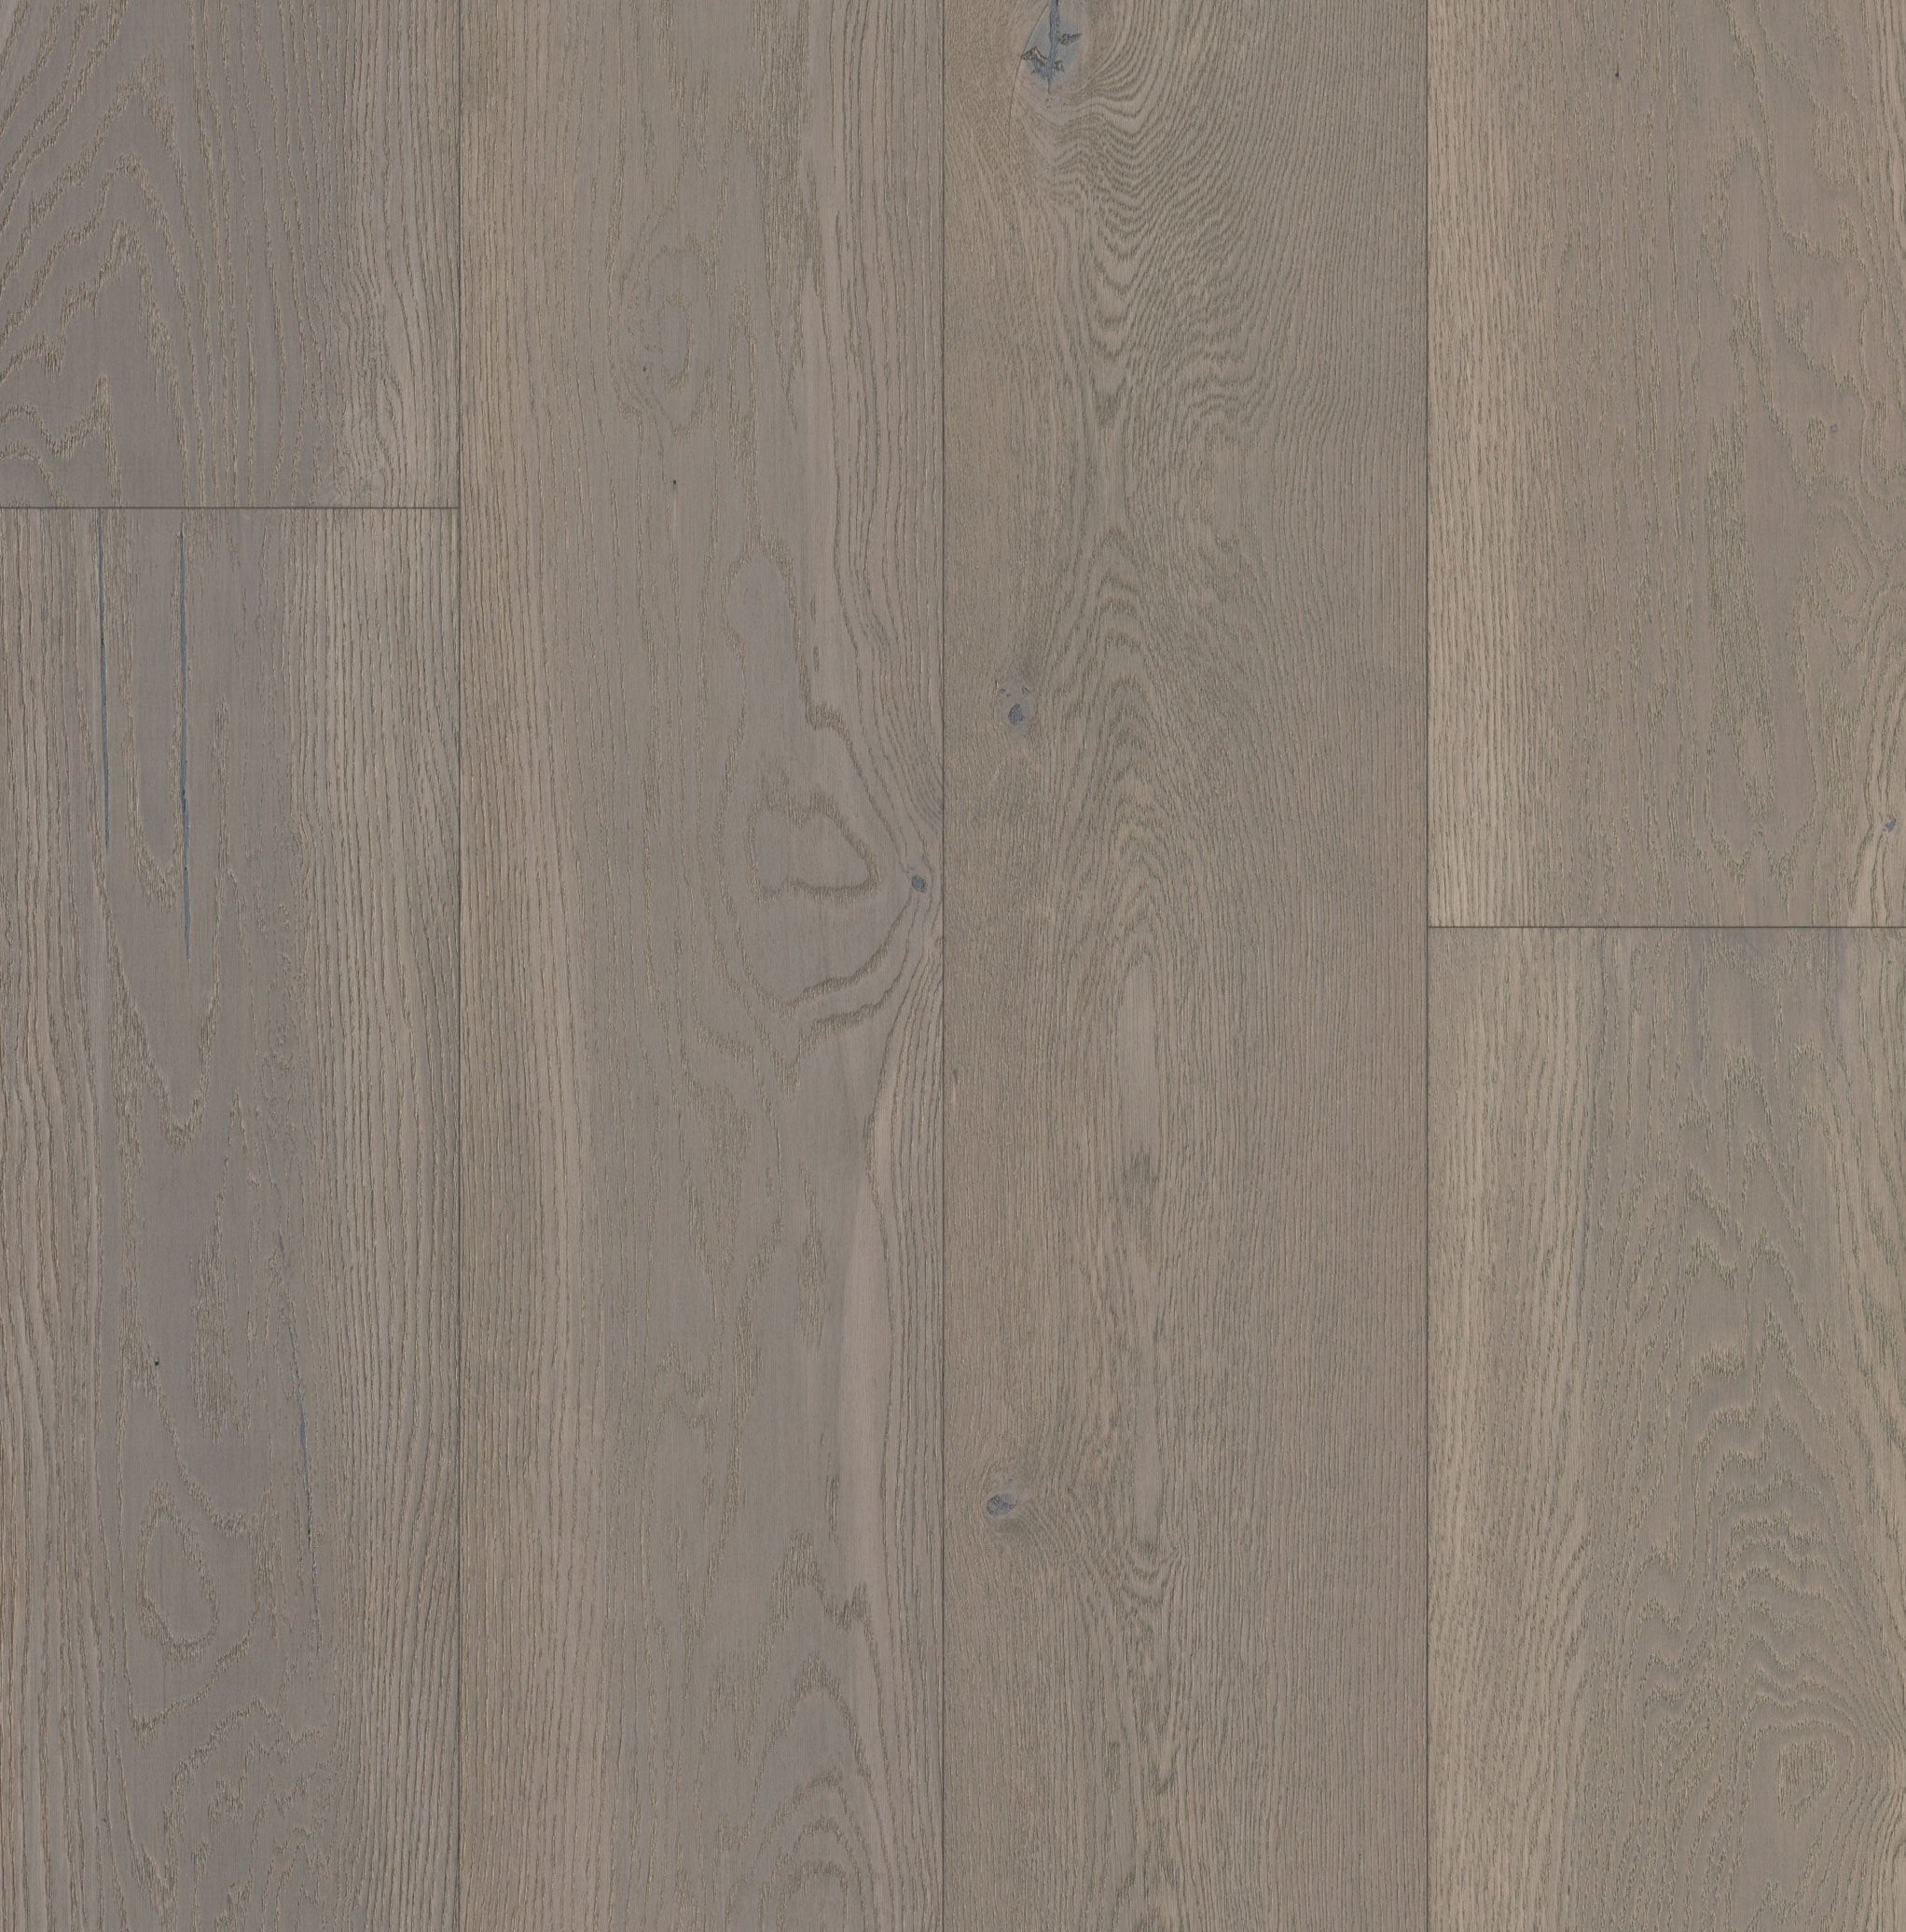 teka colonial newport german french white oak natural hardwood flooring plank stained grey distributed by surface group international